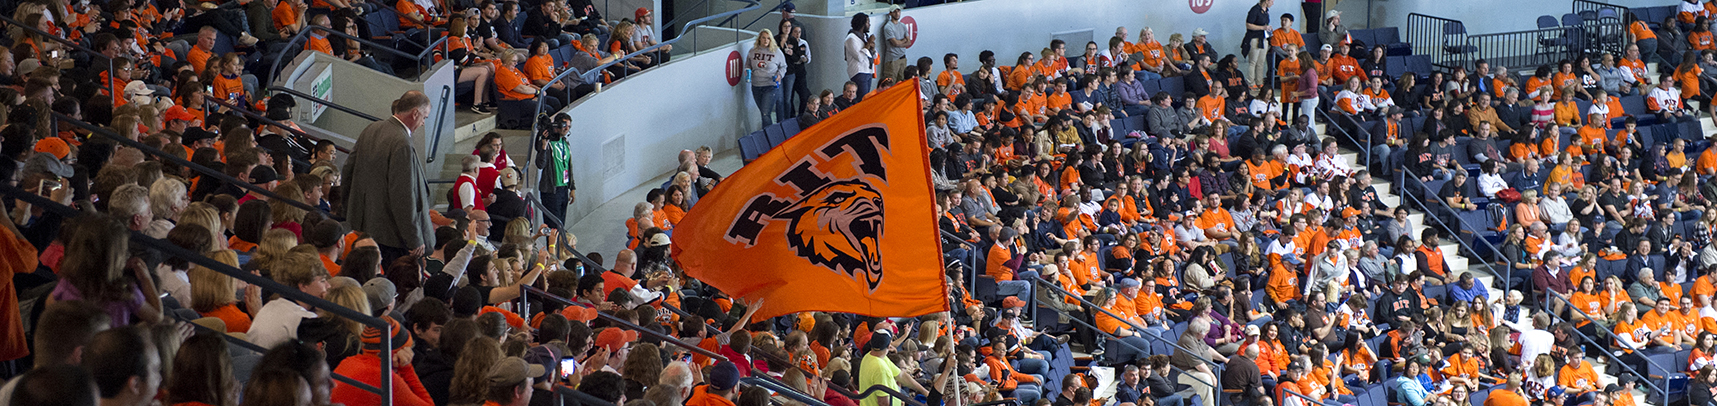 Image of RIT Fans at hockey game.